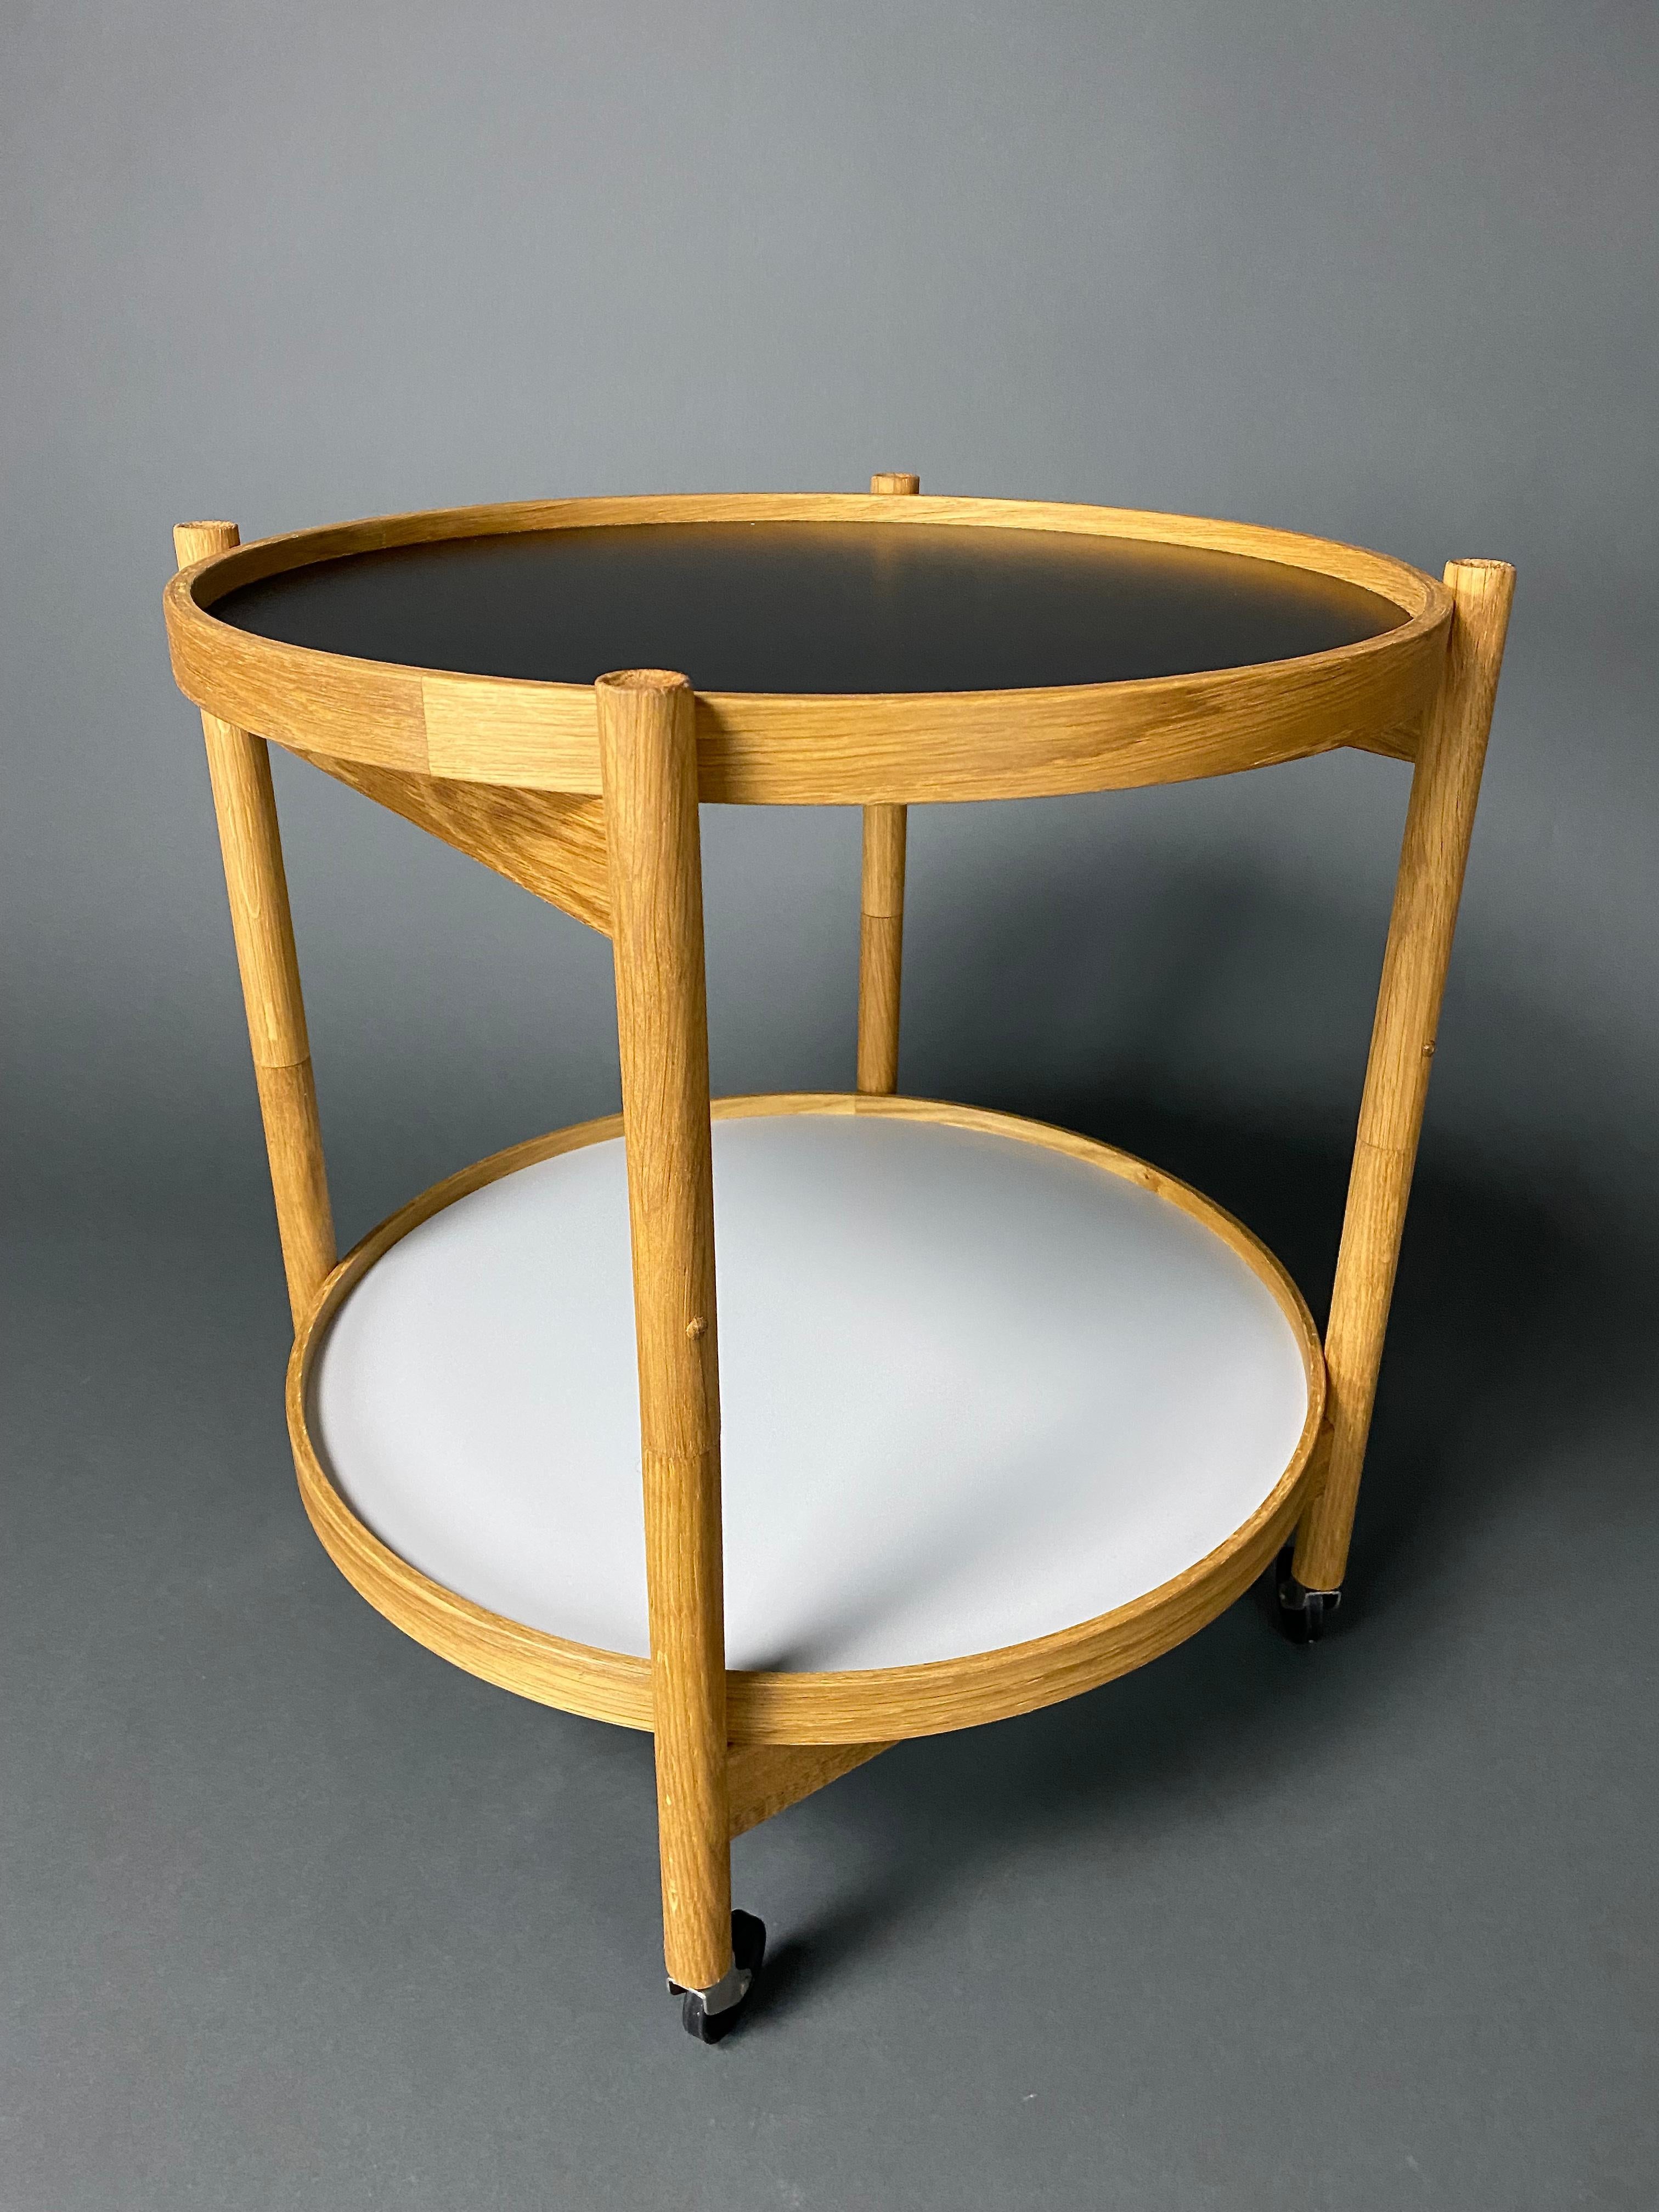 Danish Mid-Century Modern Foldable Serving Trolley In Good Condition For Sale In Weesp, NL